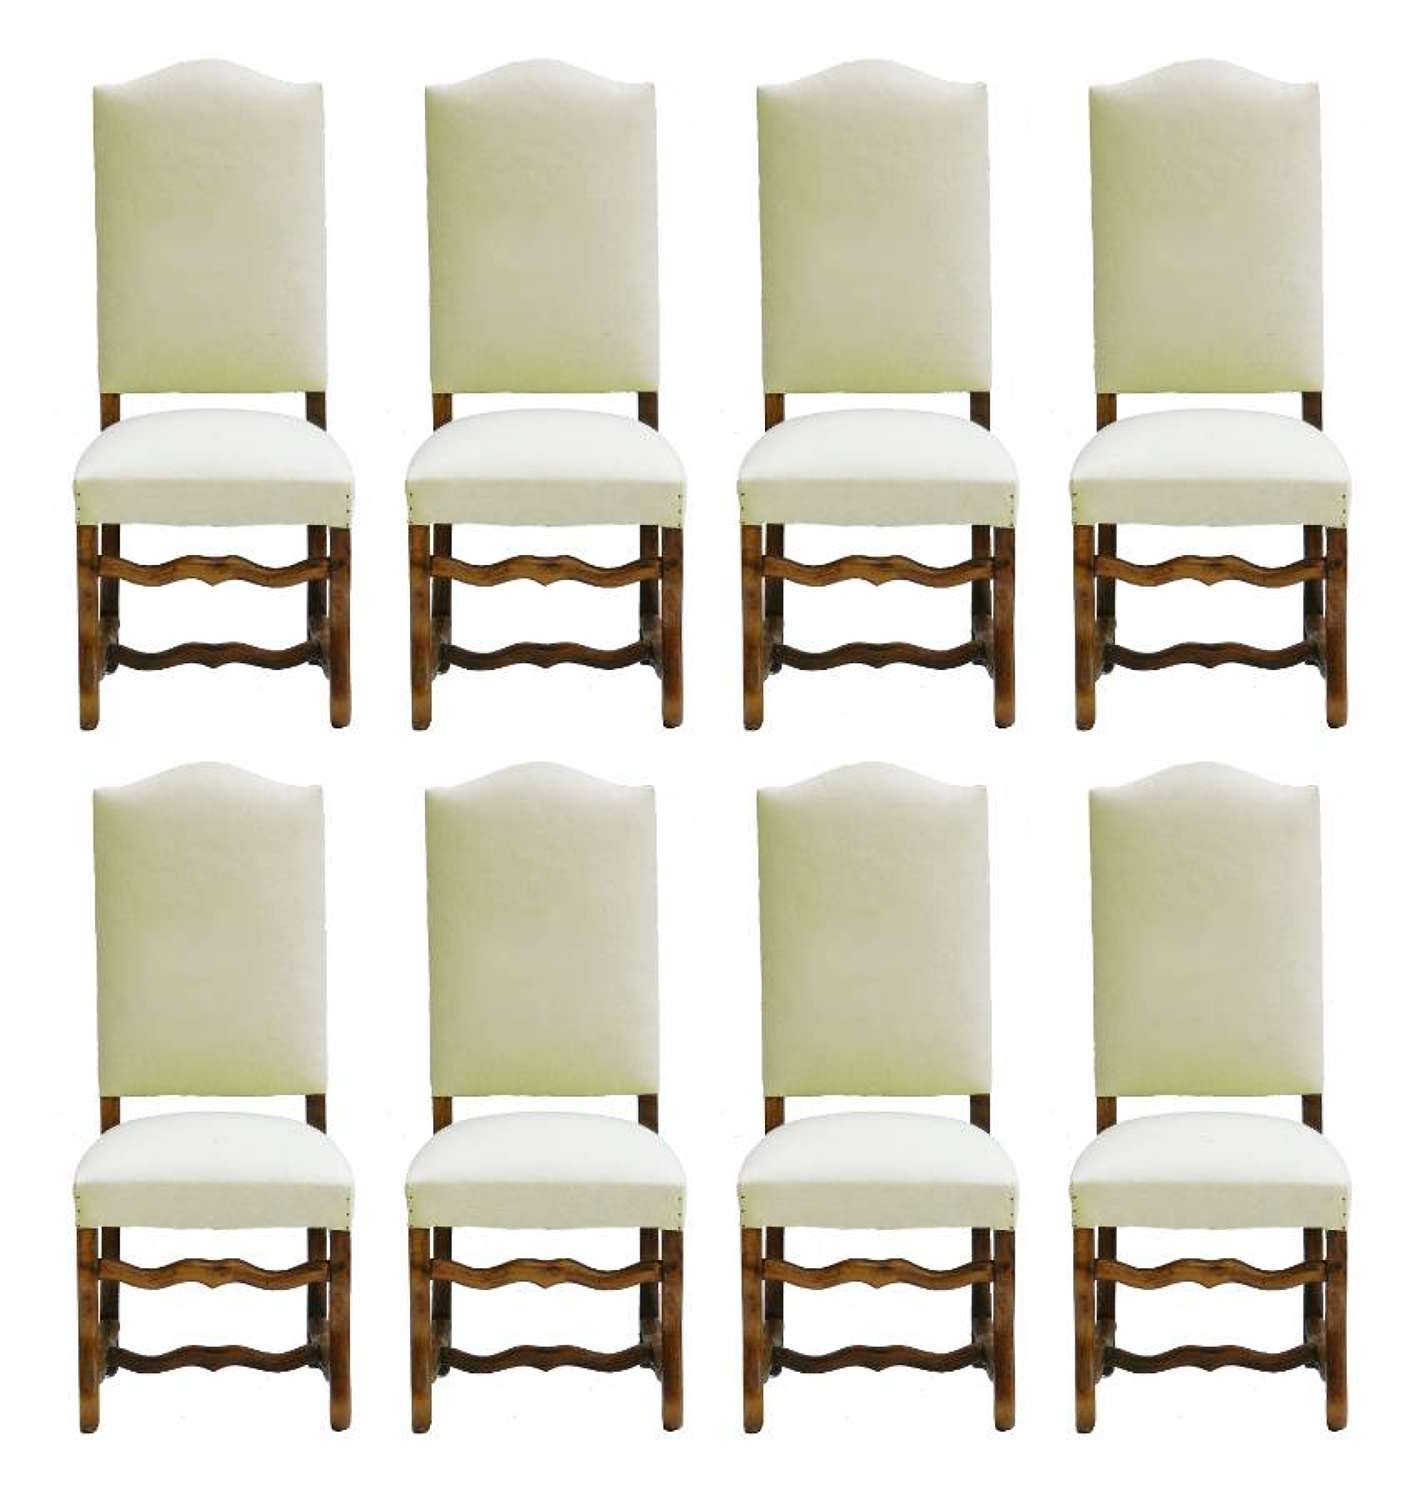 Eight Dining Chairs Os de Mouton Upholstered Ready for Top Covers Walnut